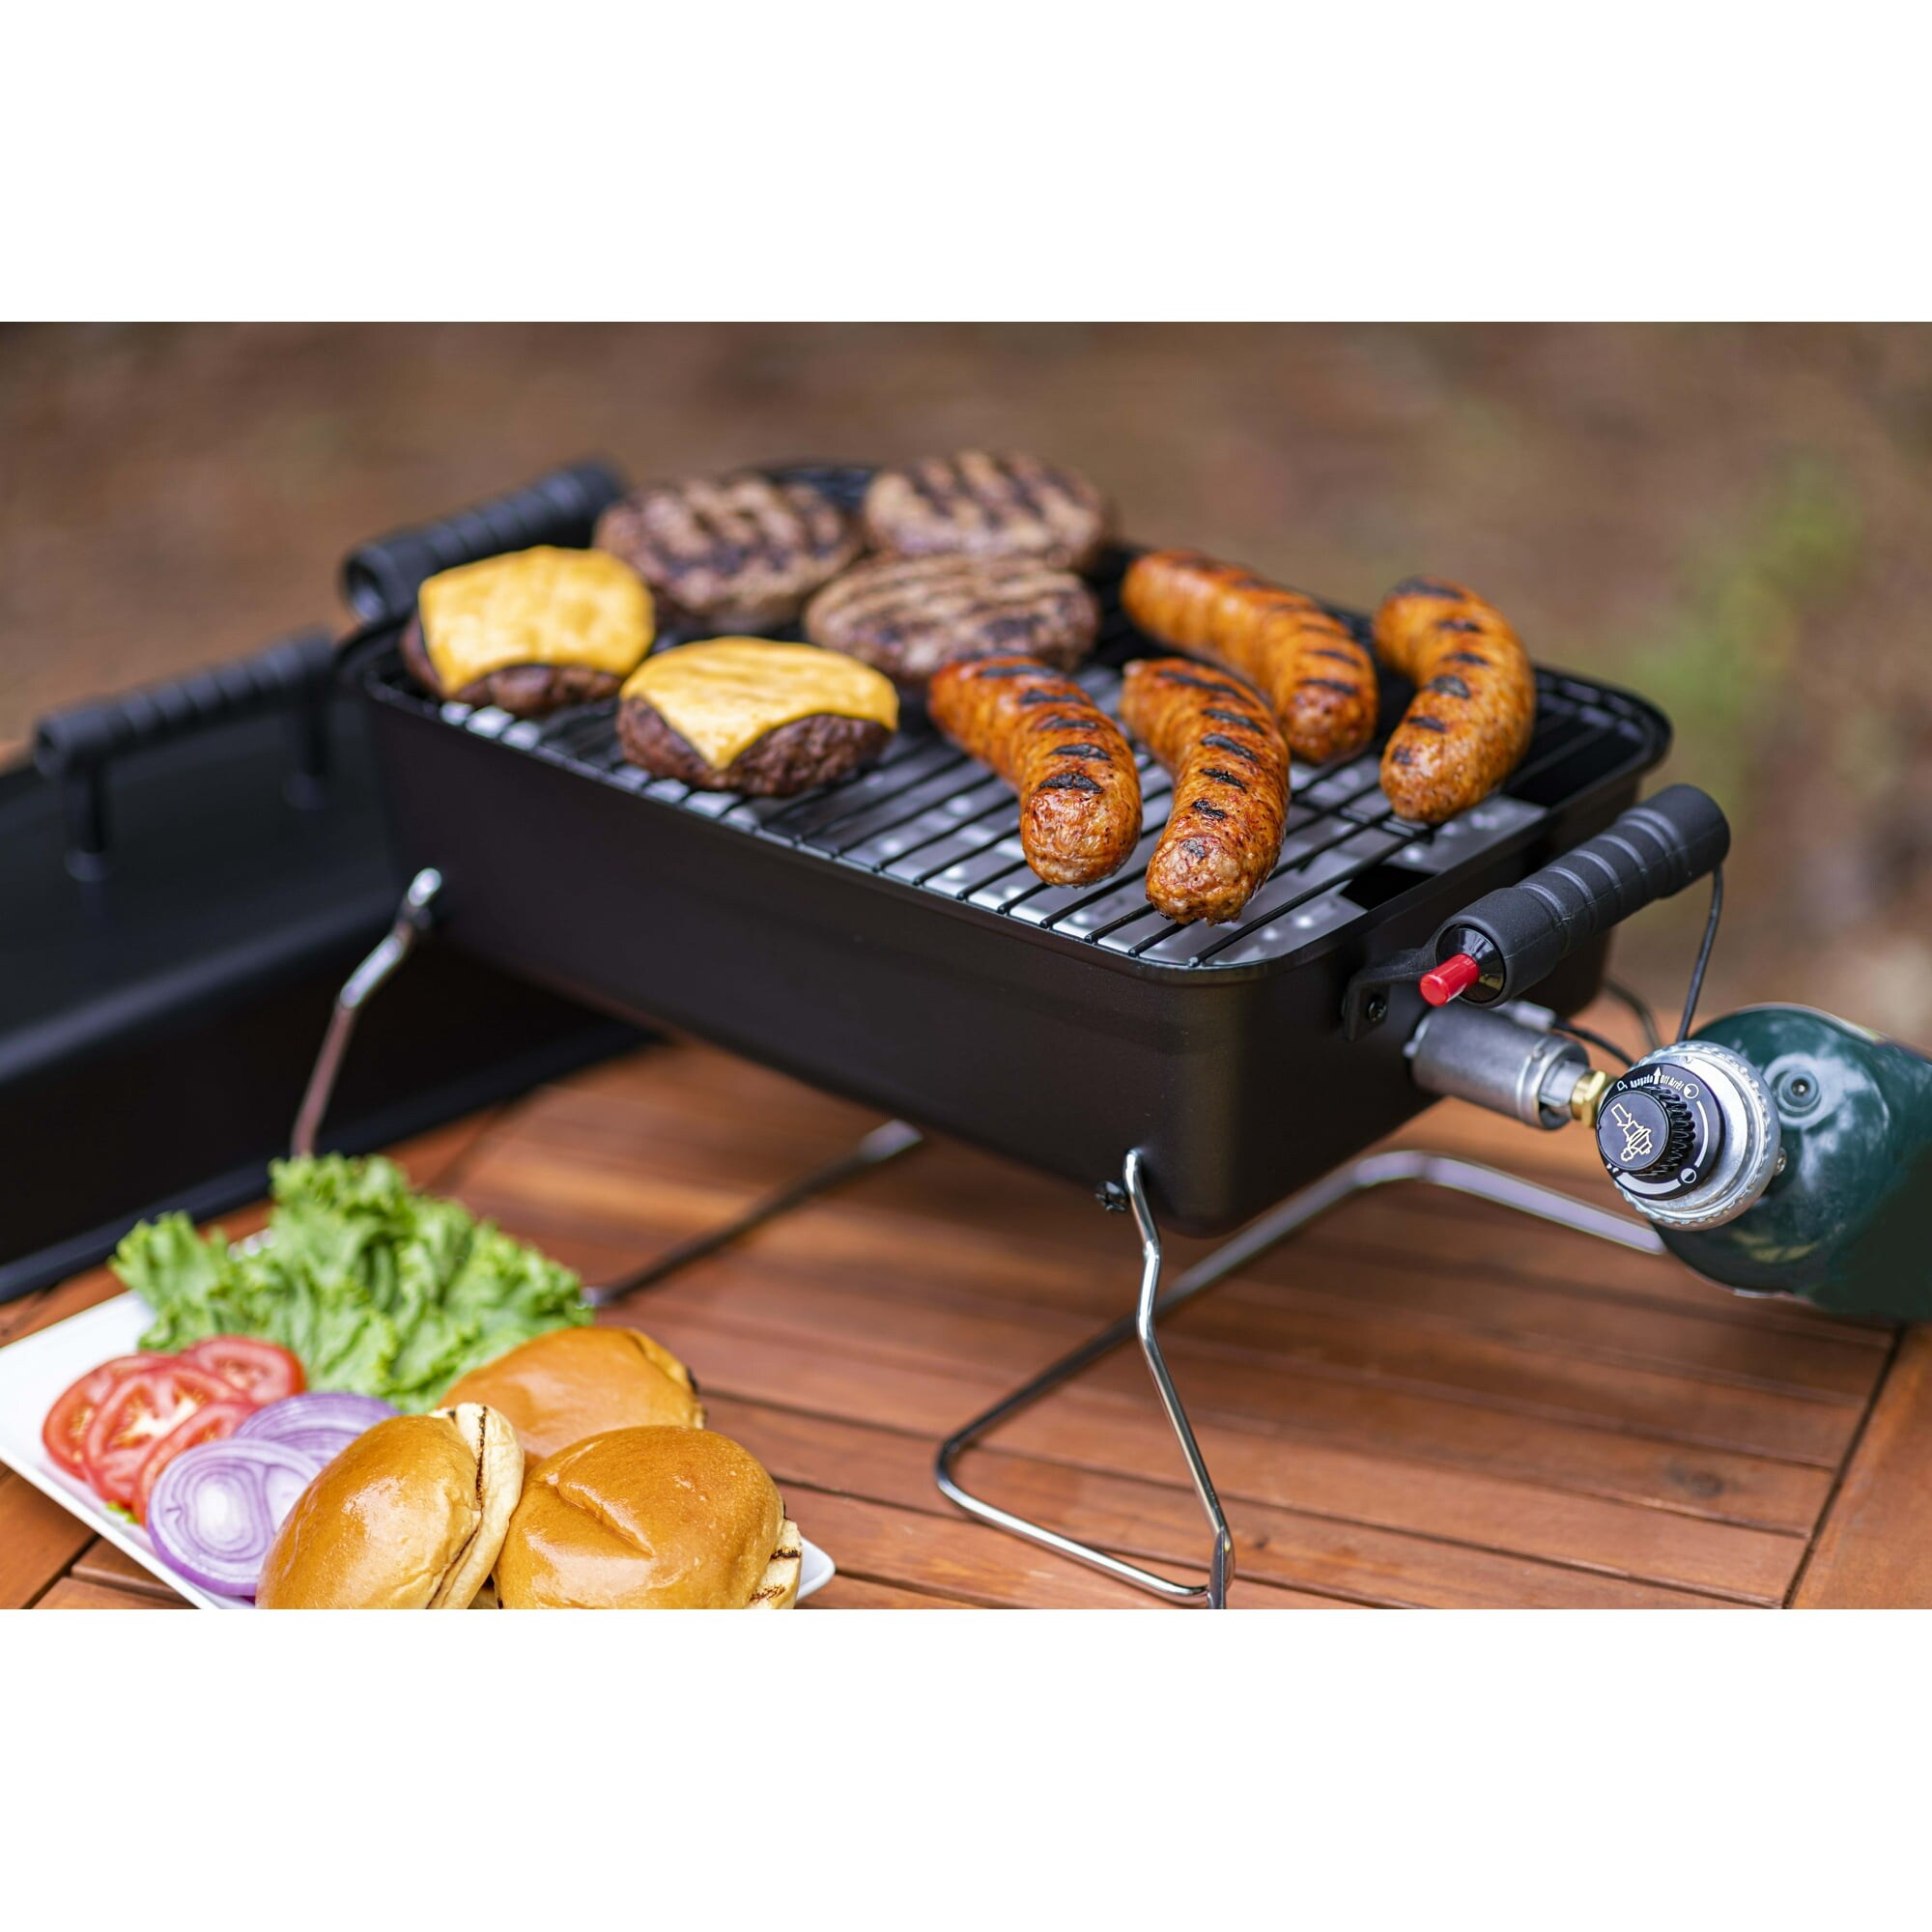 Char-Broil Portable Tabletop Gas Grill